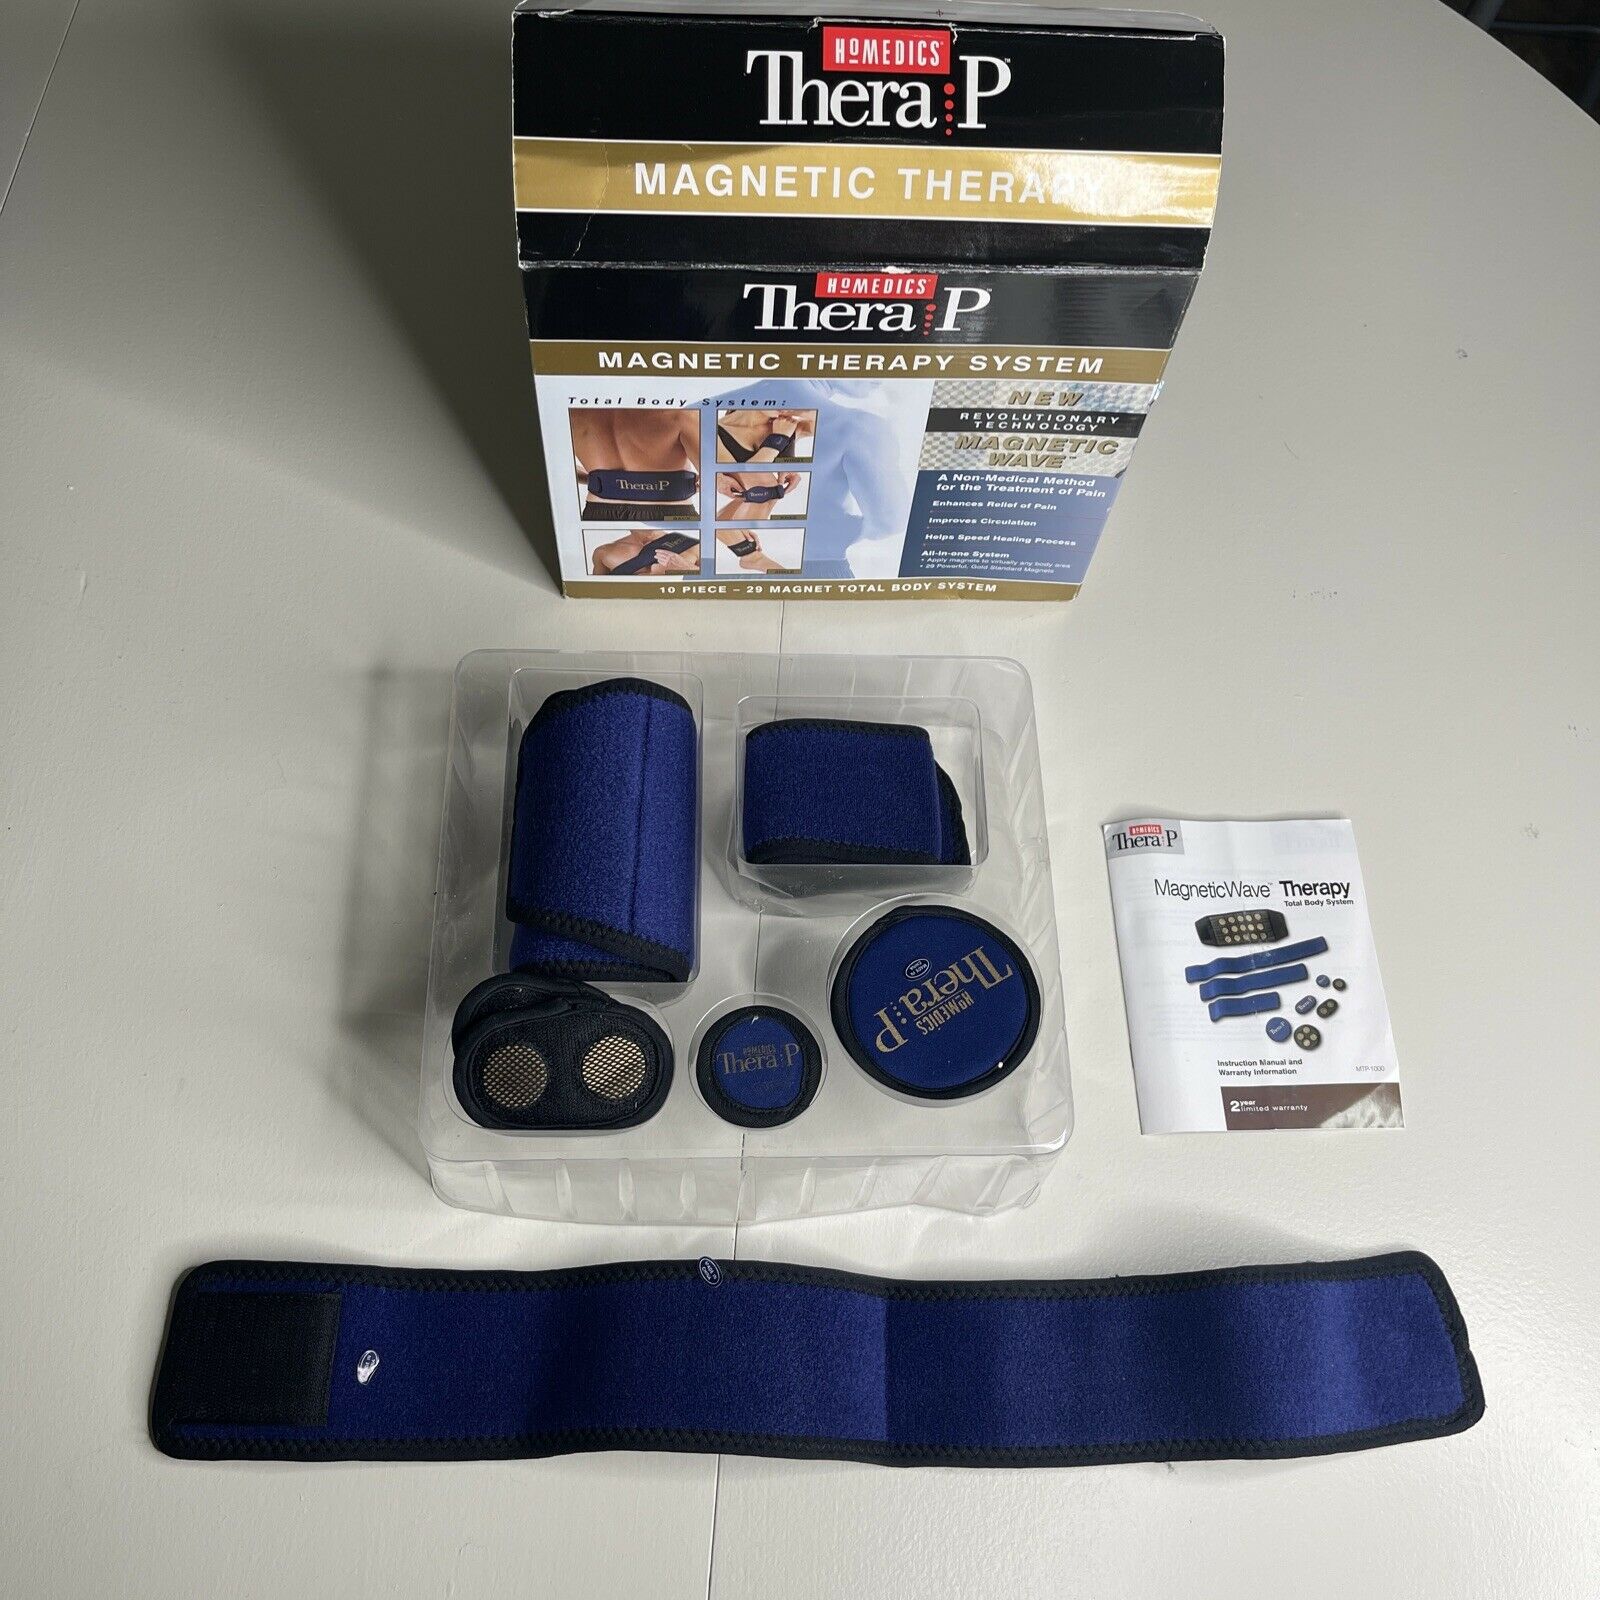 Homedics Thera P Magnetic Therapy System 6 Piece 29 Magnets Body System In Box